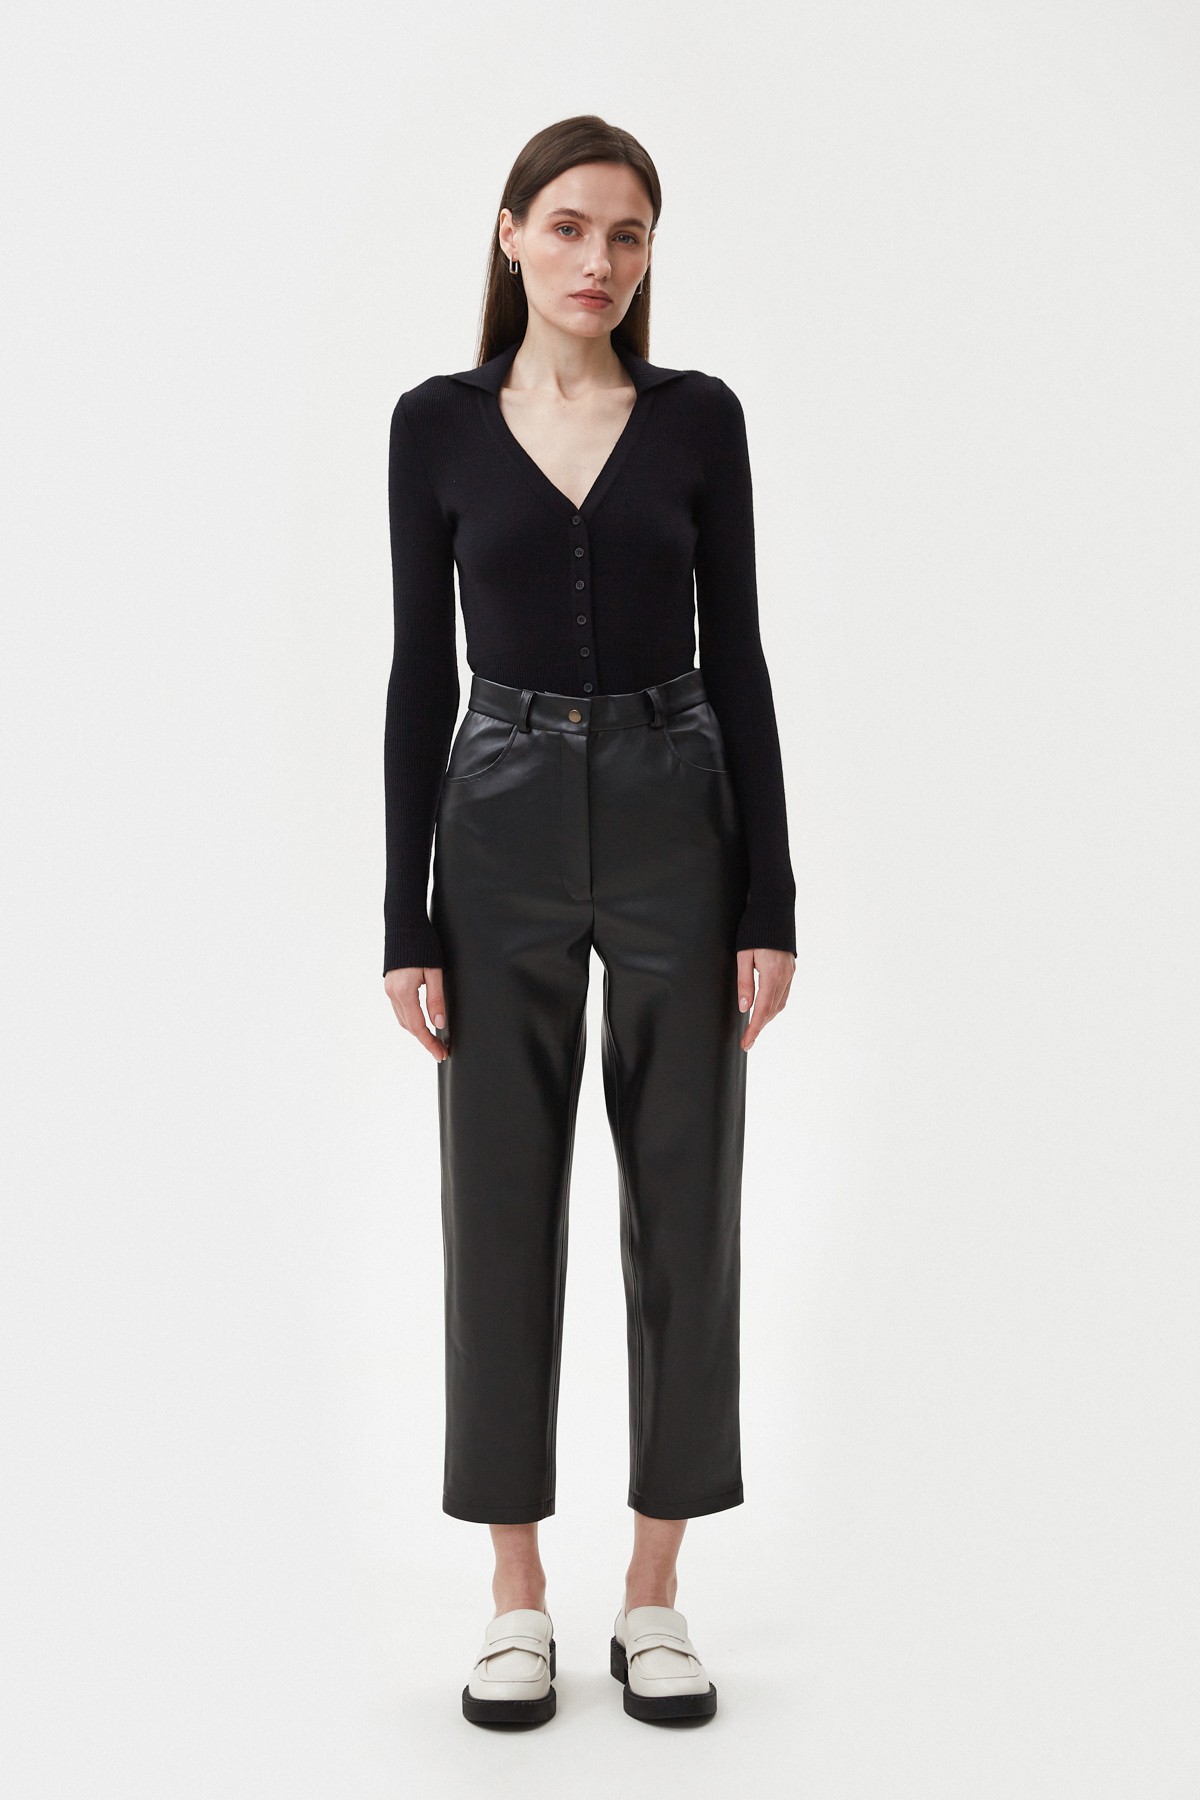 Black cropped pants made of eco-leather